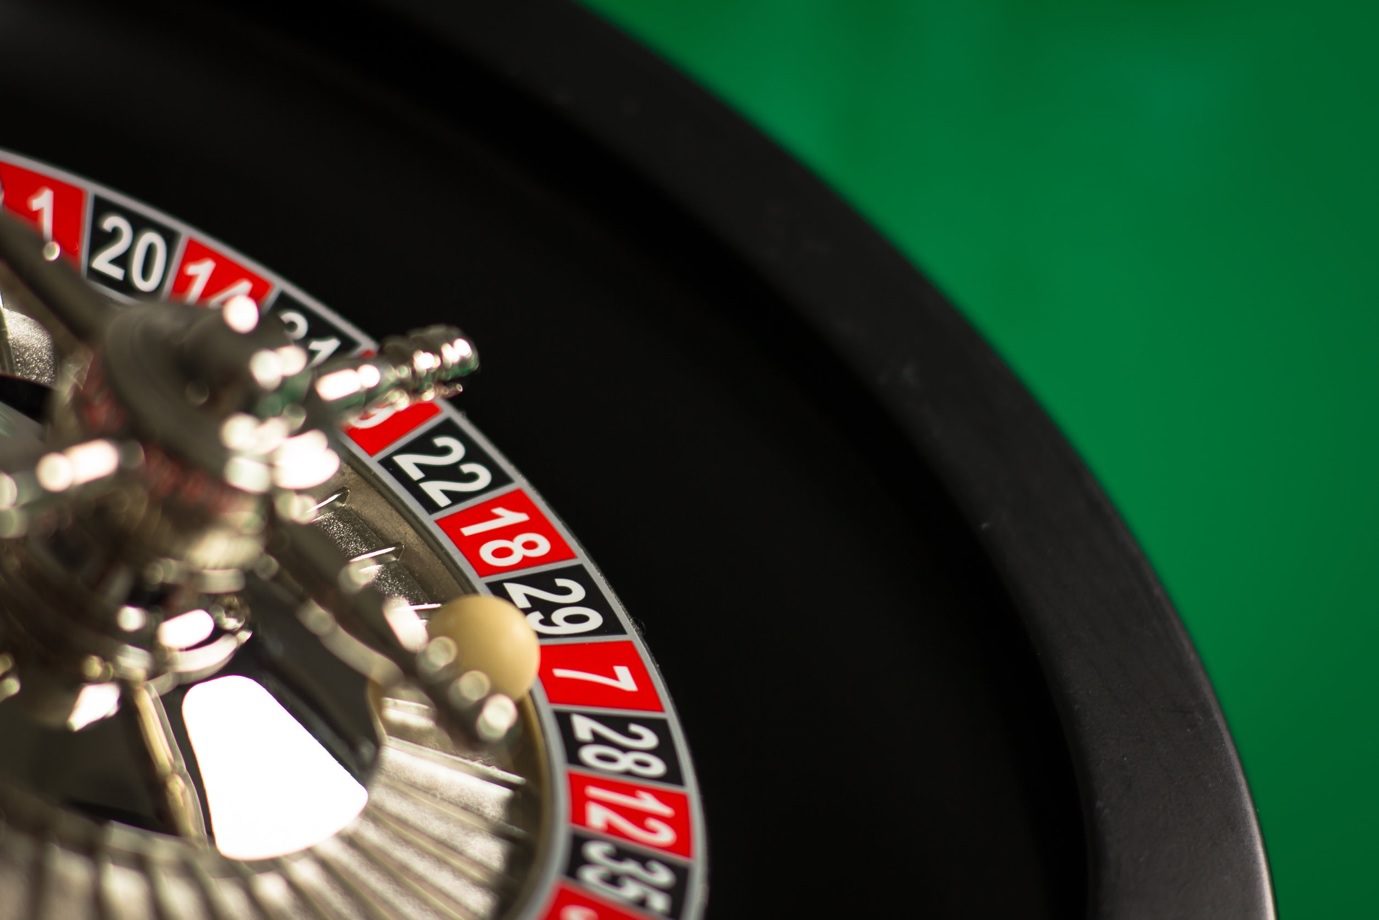 What are the most common numbers bet on in roulette?